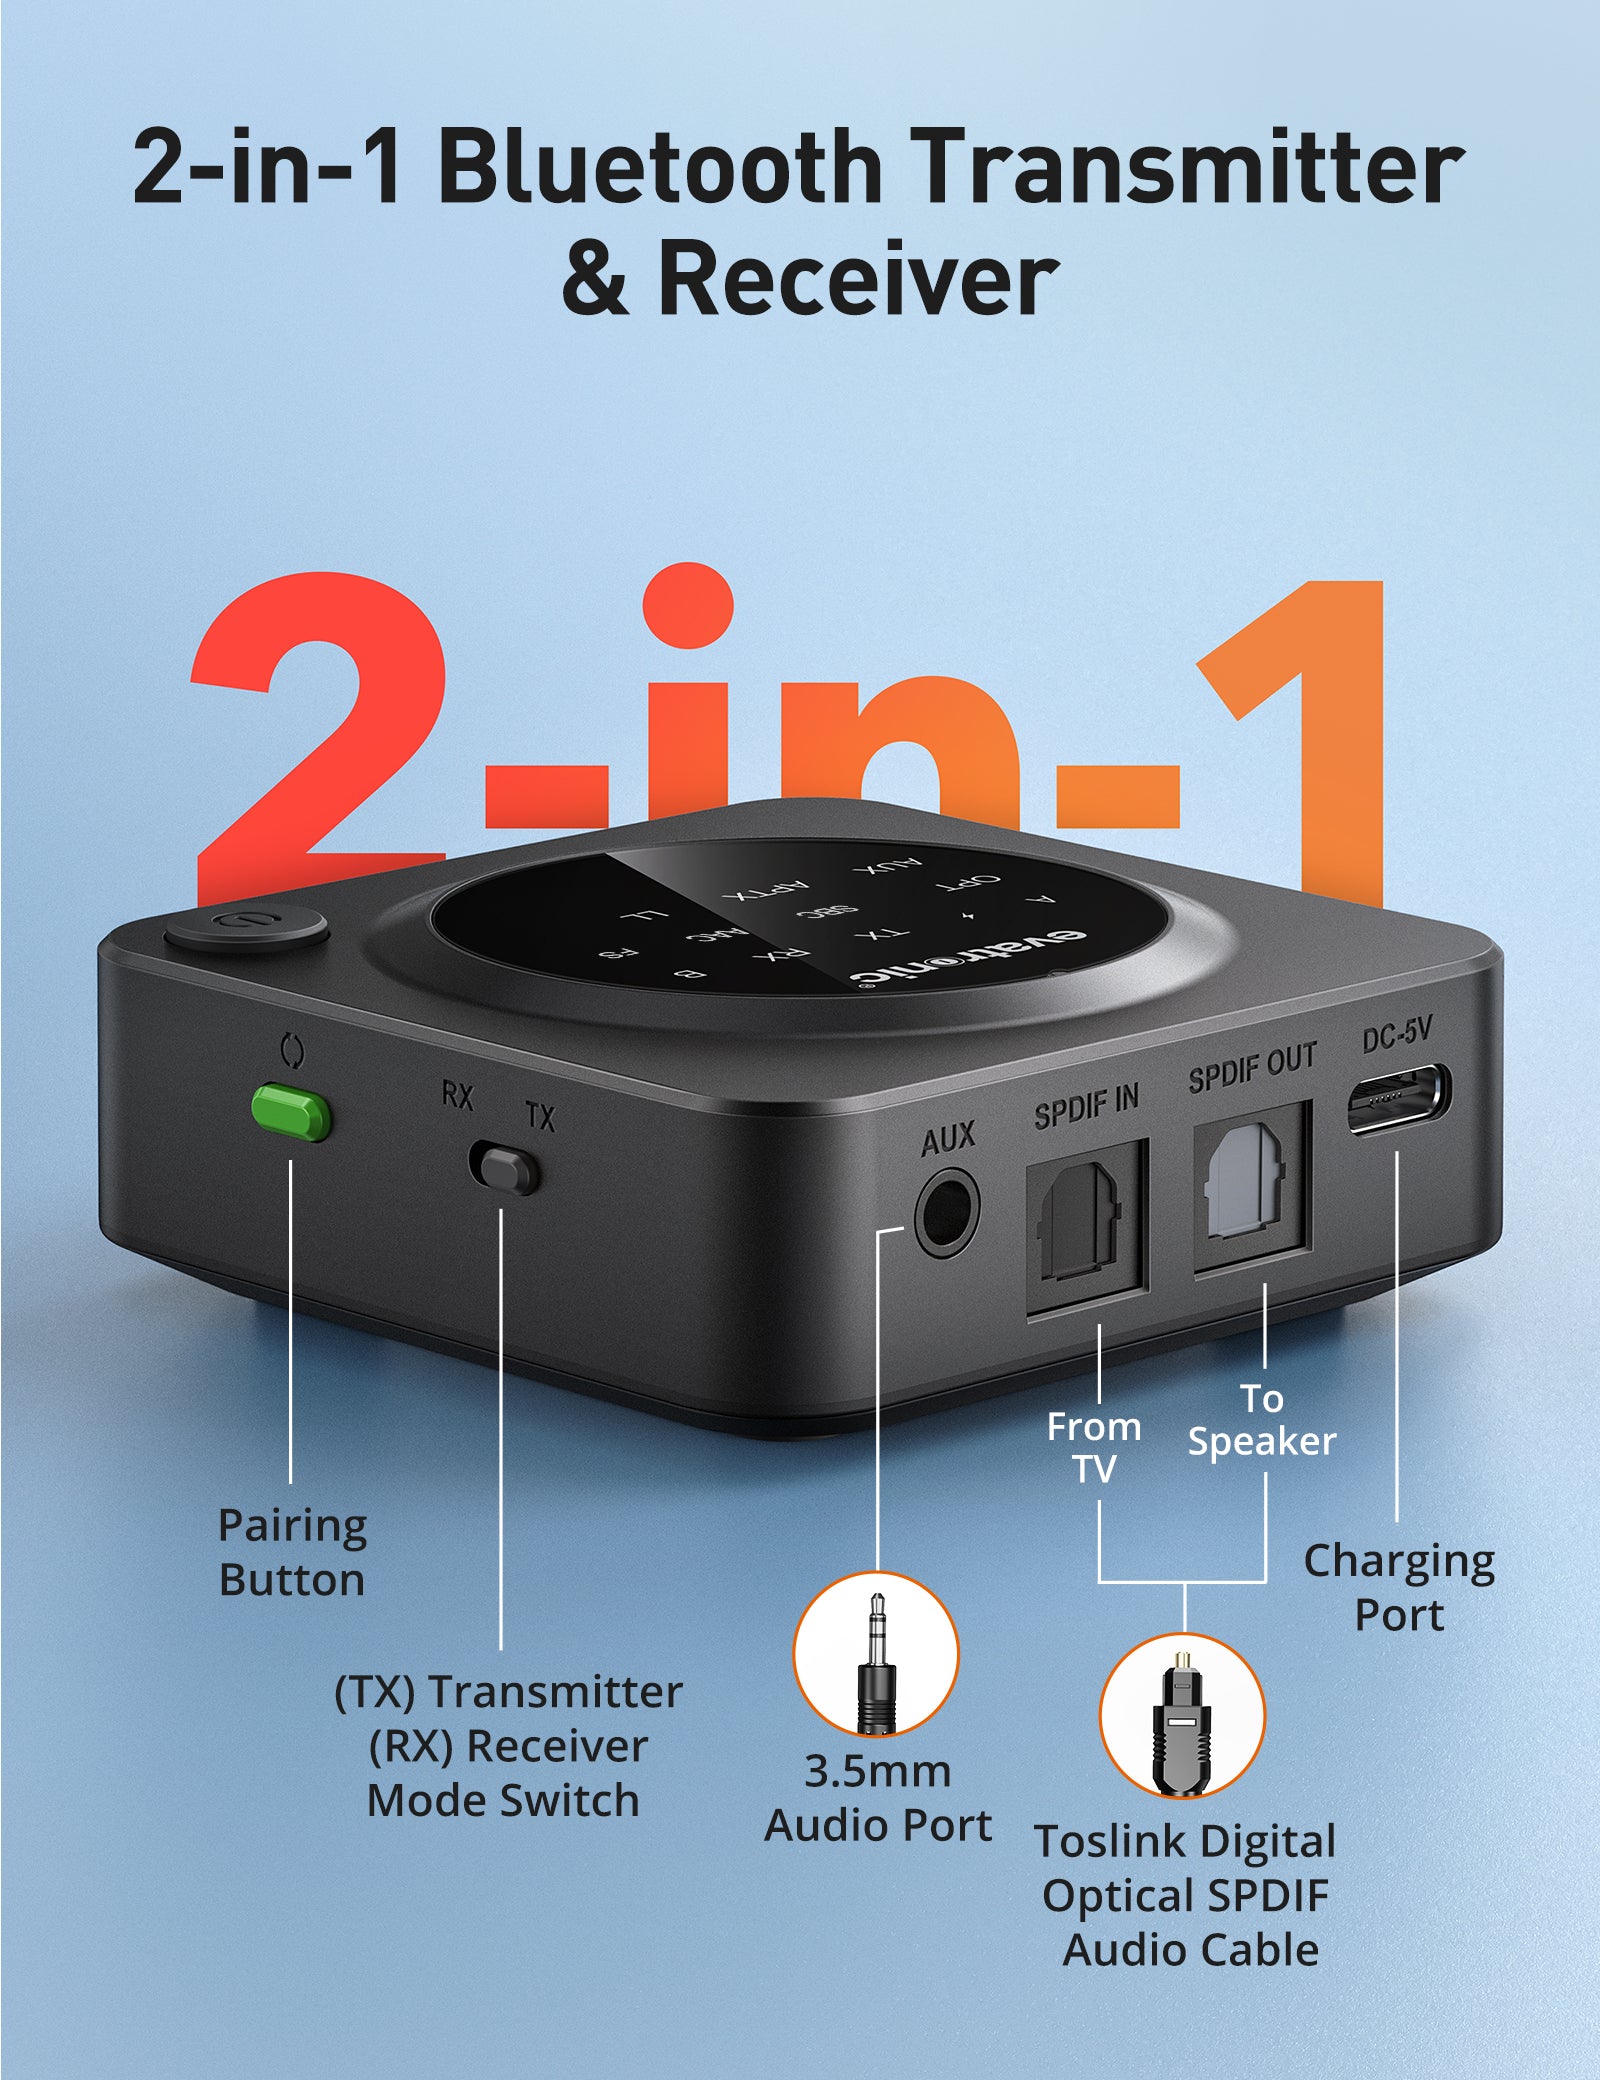 Connect Hub Bluetooth Audio Transmitter and Receiver for TV (USED